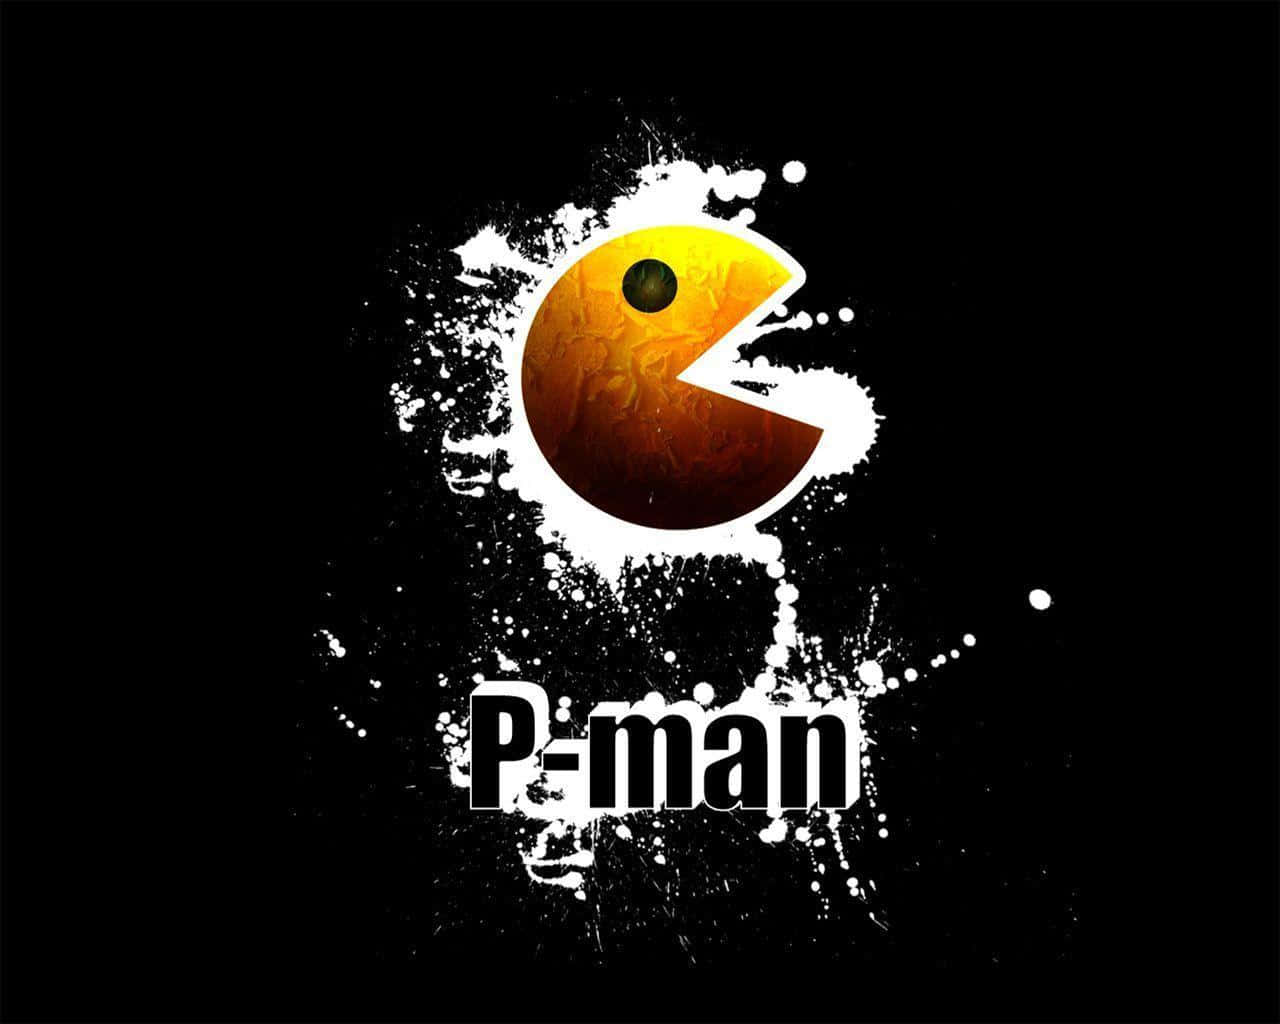 A Pacman Logo On A Black Background Wallpaper